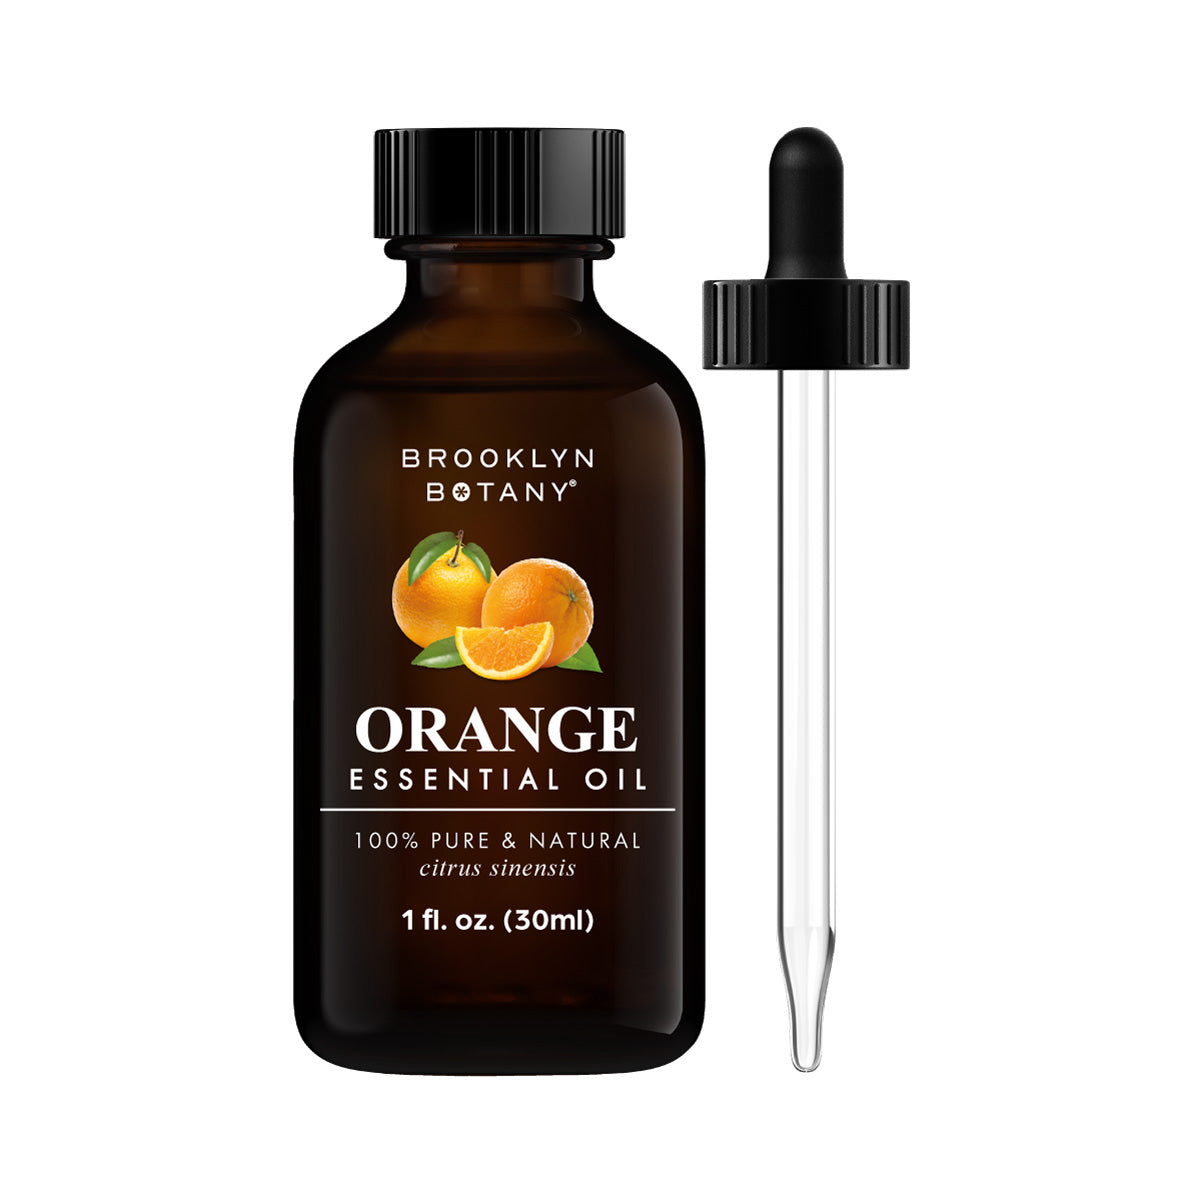 Shopify-BB-30ml-Orange-Essential-Oil-Main-Image-with-Sides.jpg